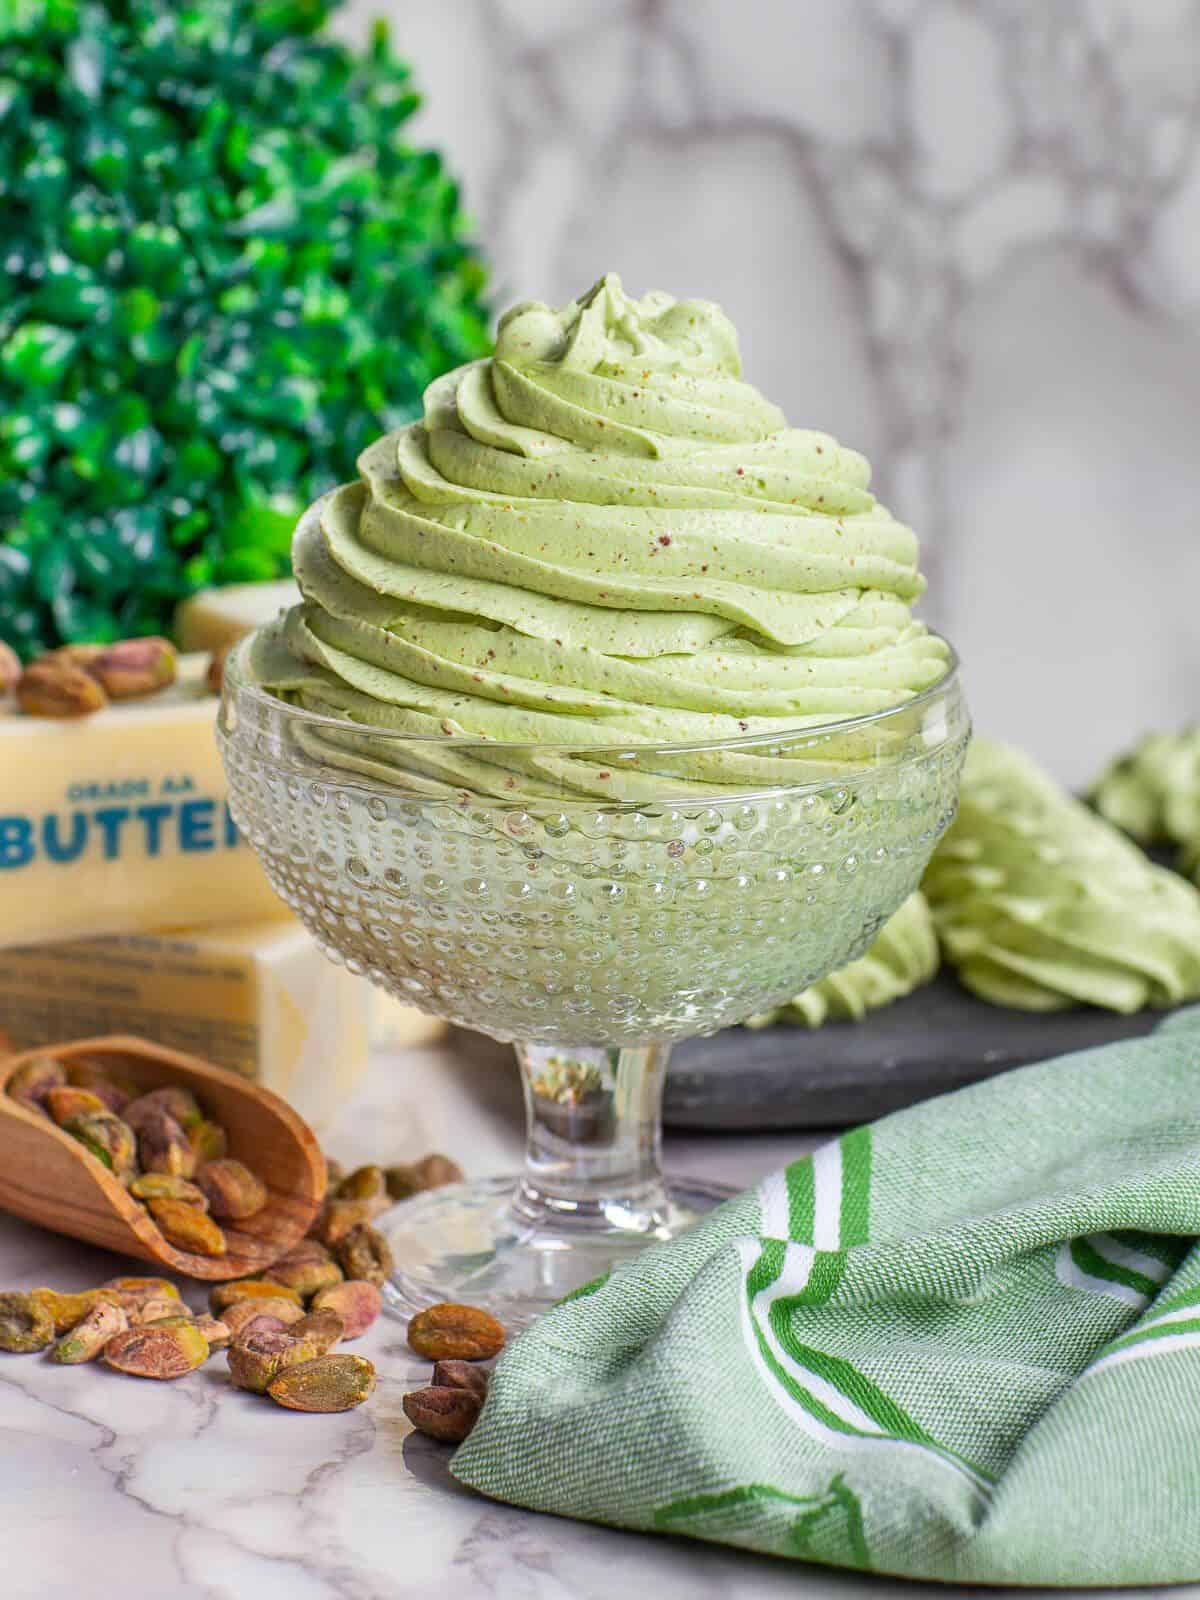 Pistachio Buttercream Frosting in a tall glass.